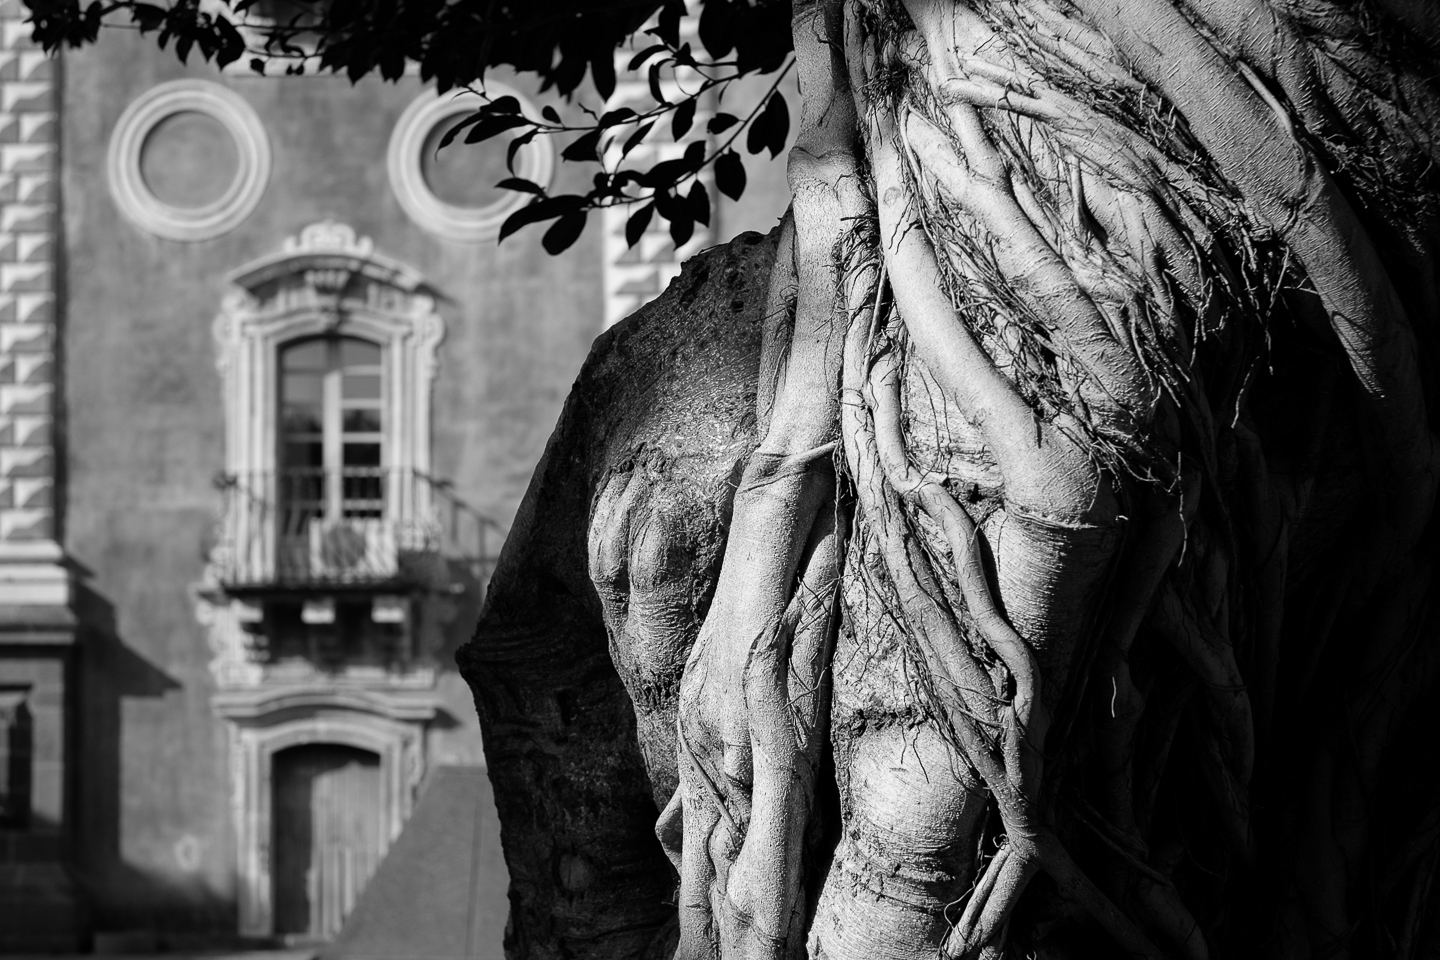 tree in front of a building with a large statue